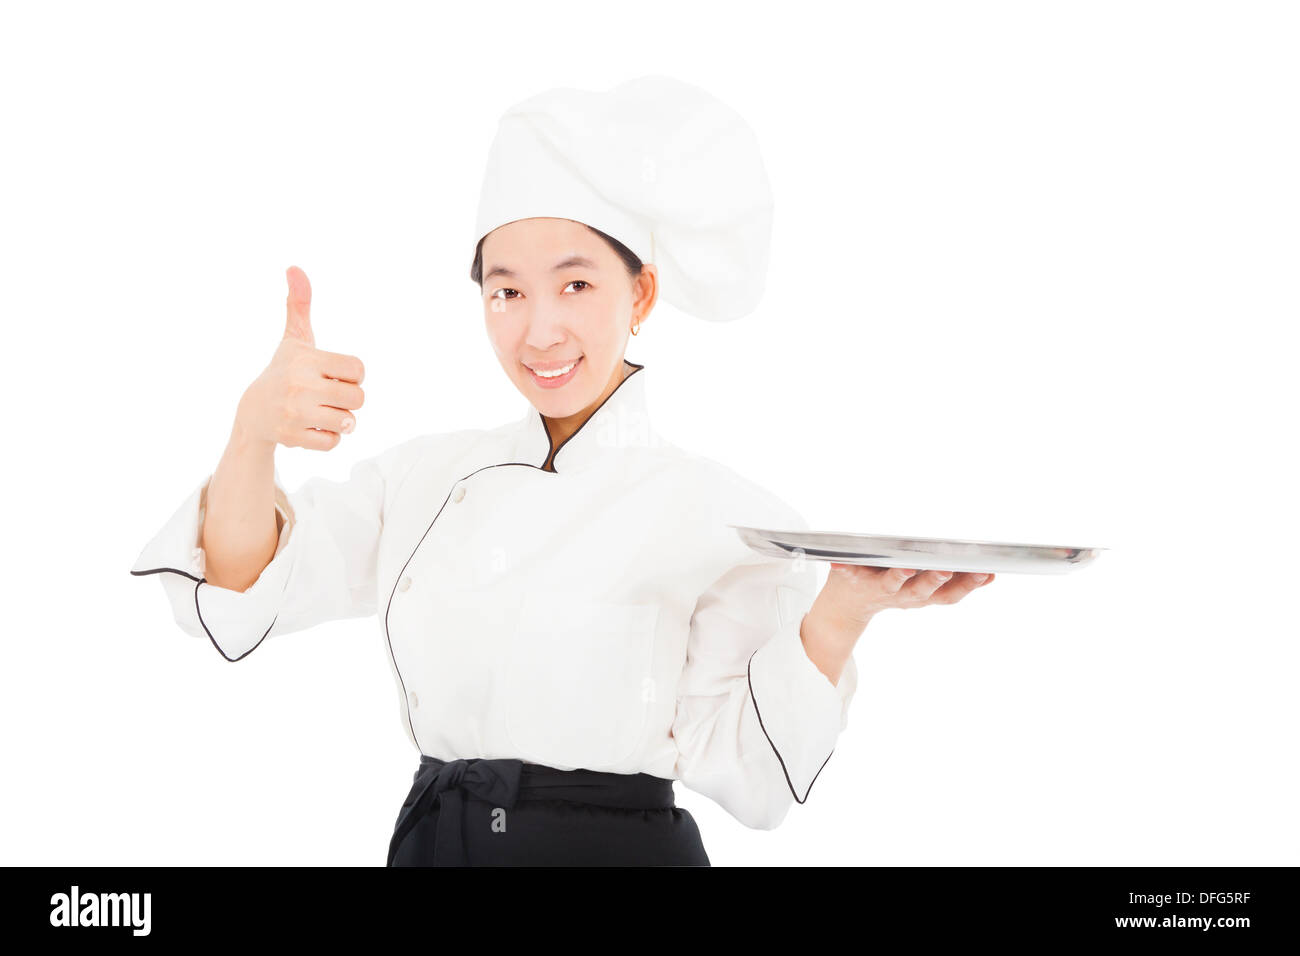 smiling young woman chef with thumb up Stock Photo